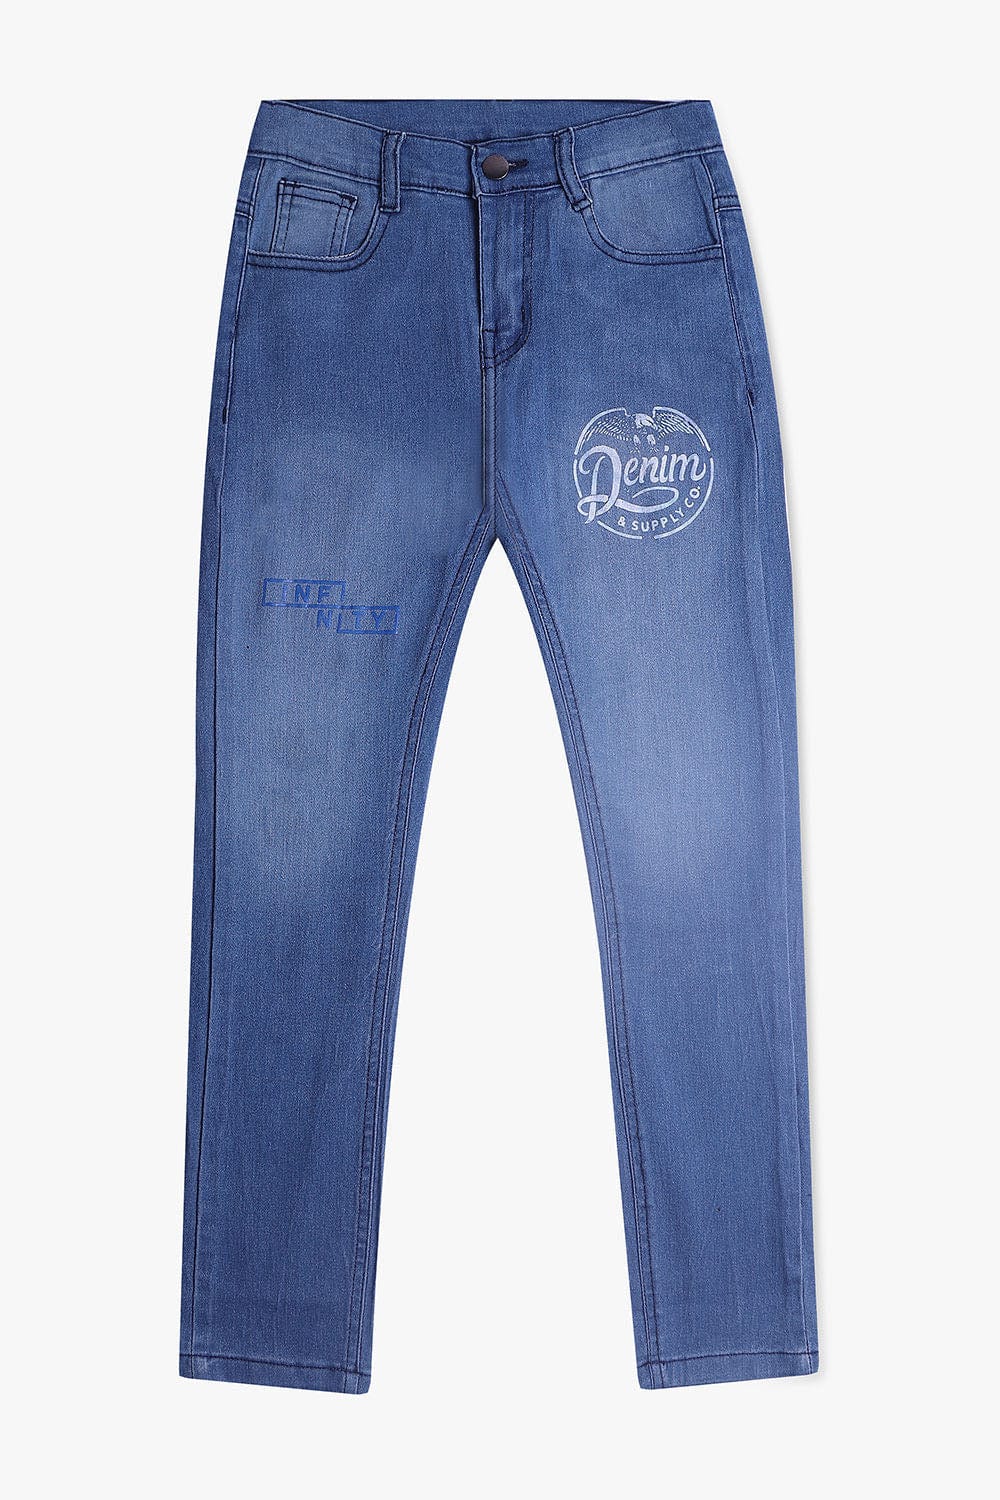 Hope Not Out by Shahid Afridi Boys Denim Pants Graphic Denim